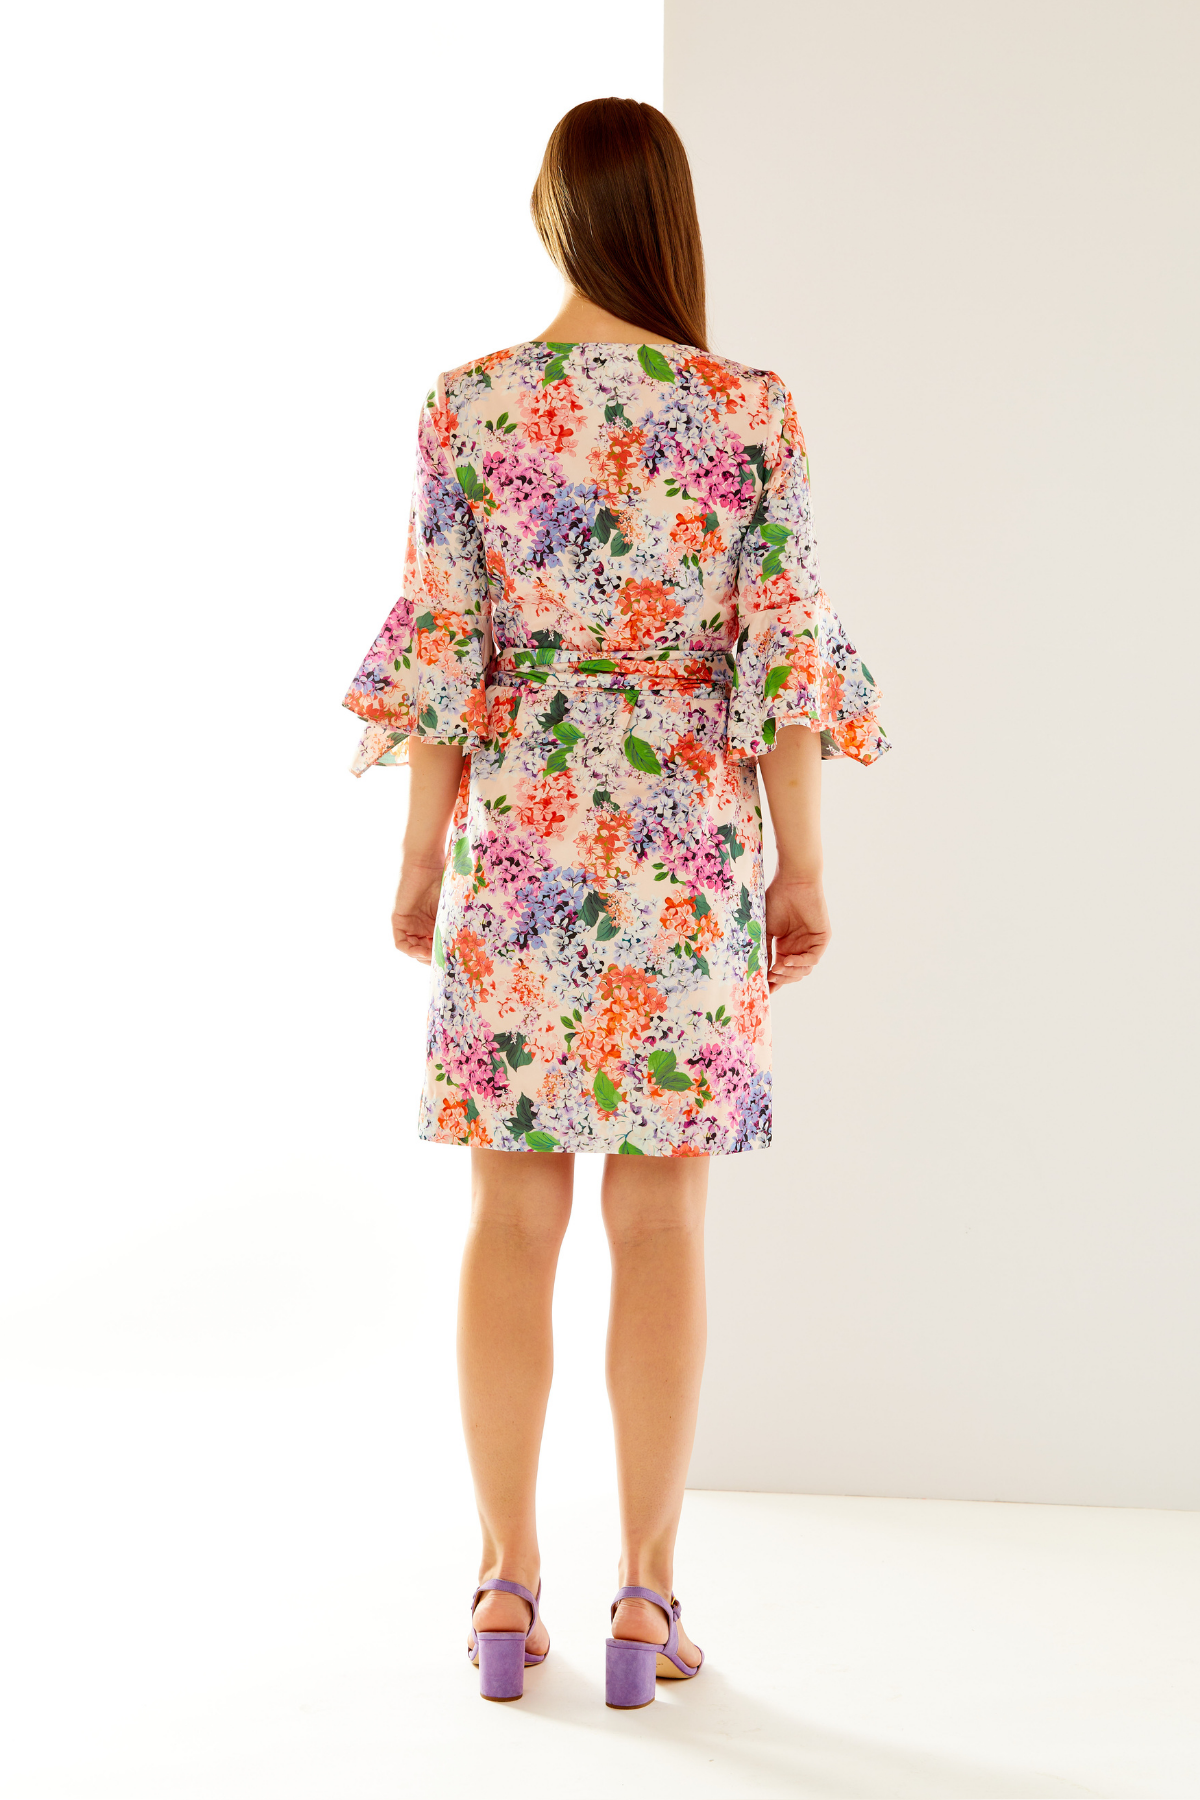 Woman in floral blossom dress